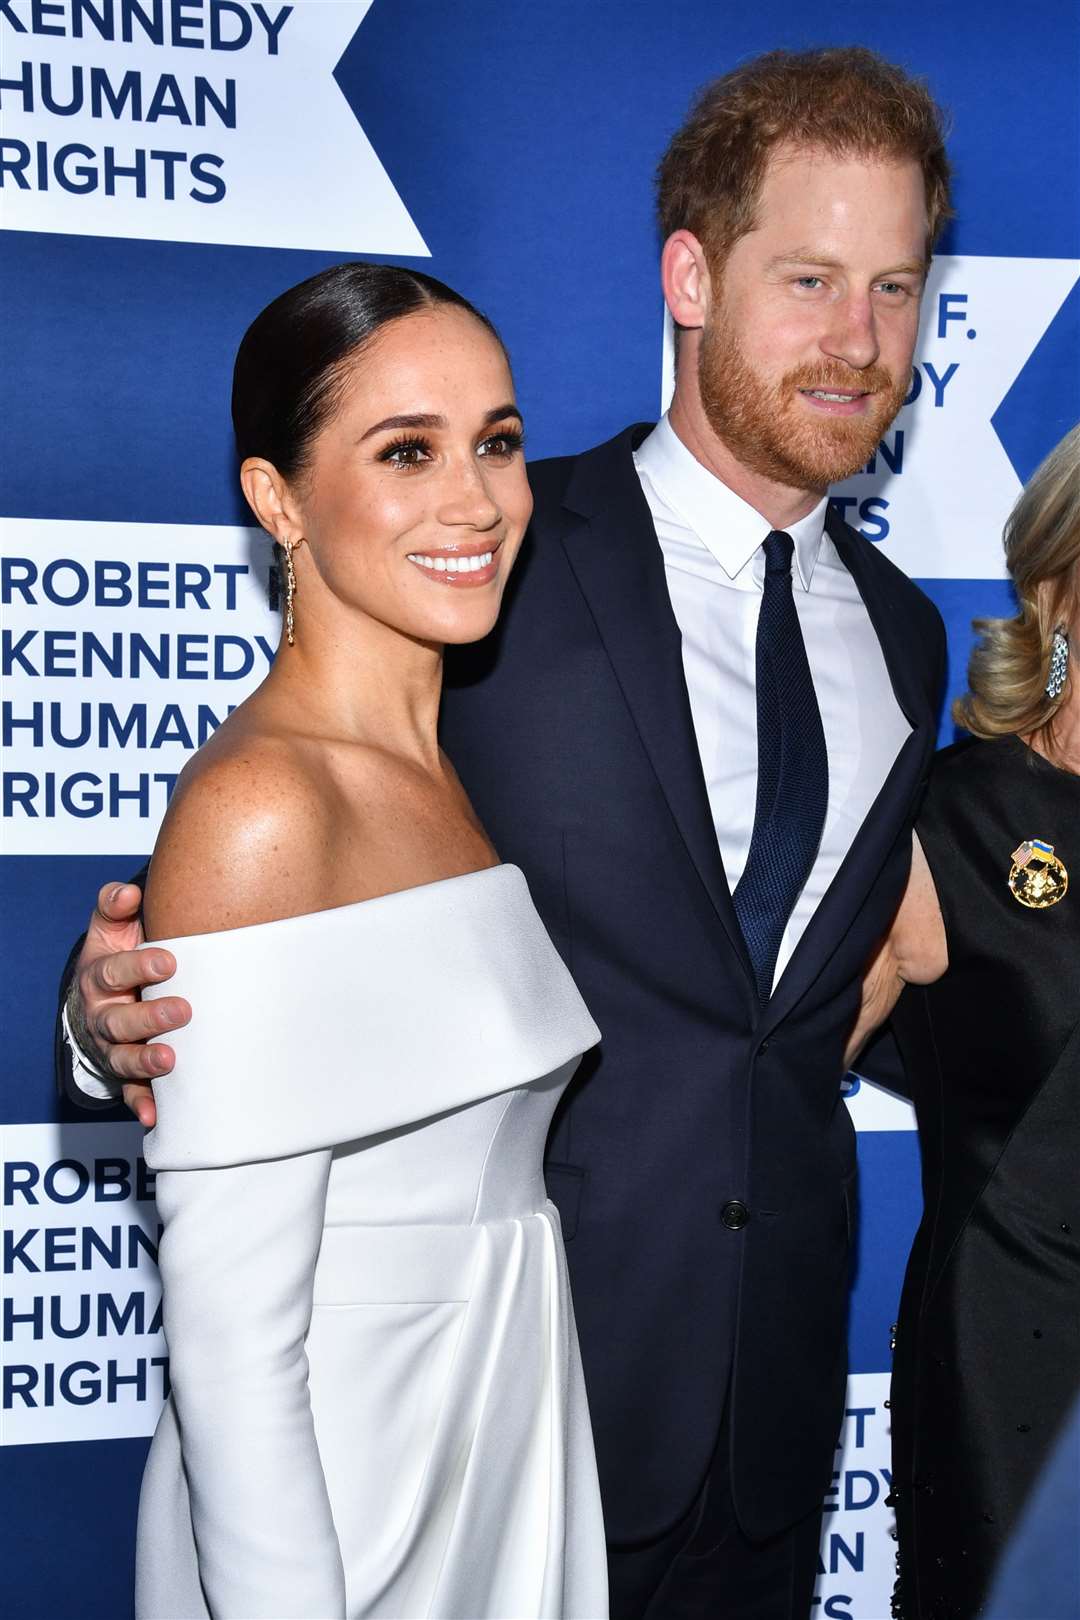 The Duke and Duchess of Sussex (PA)